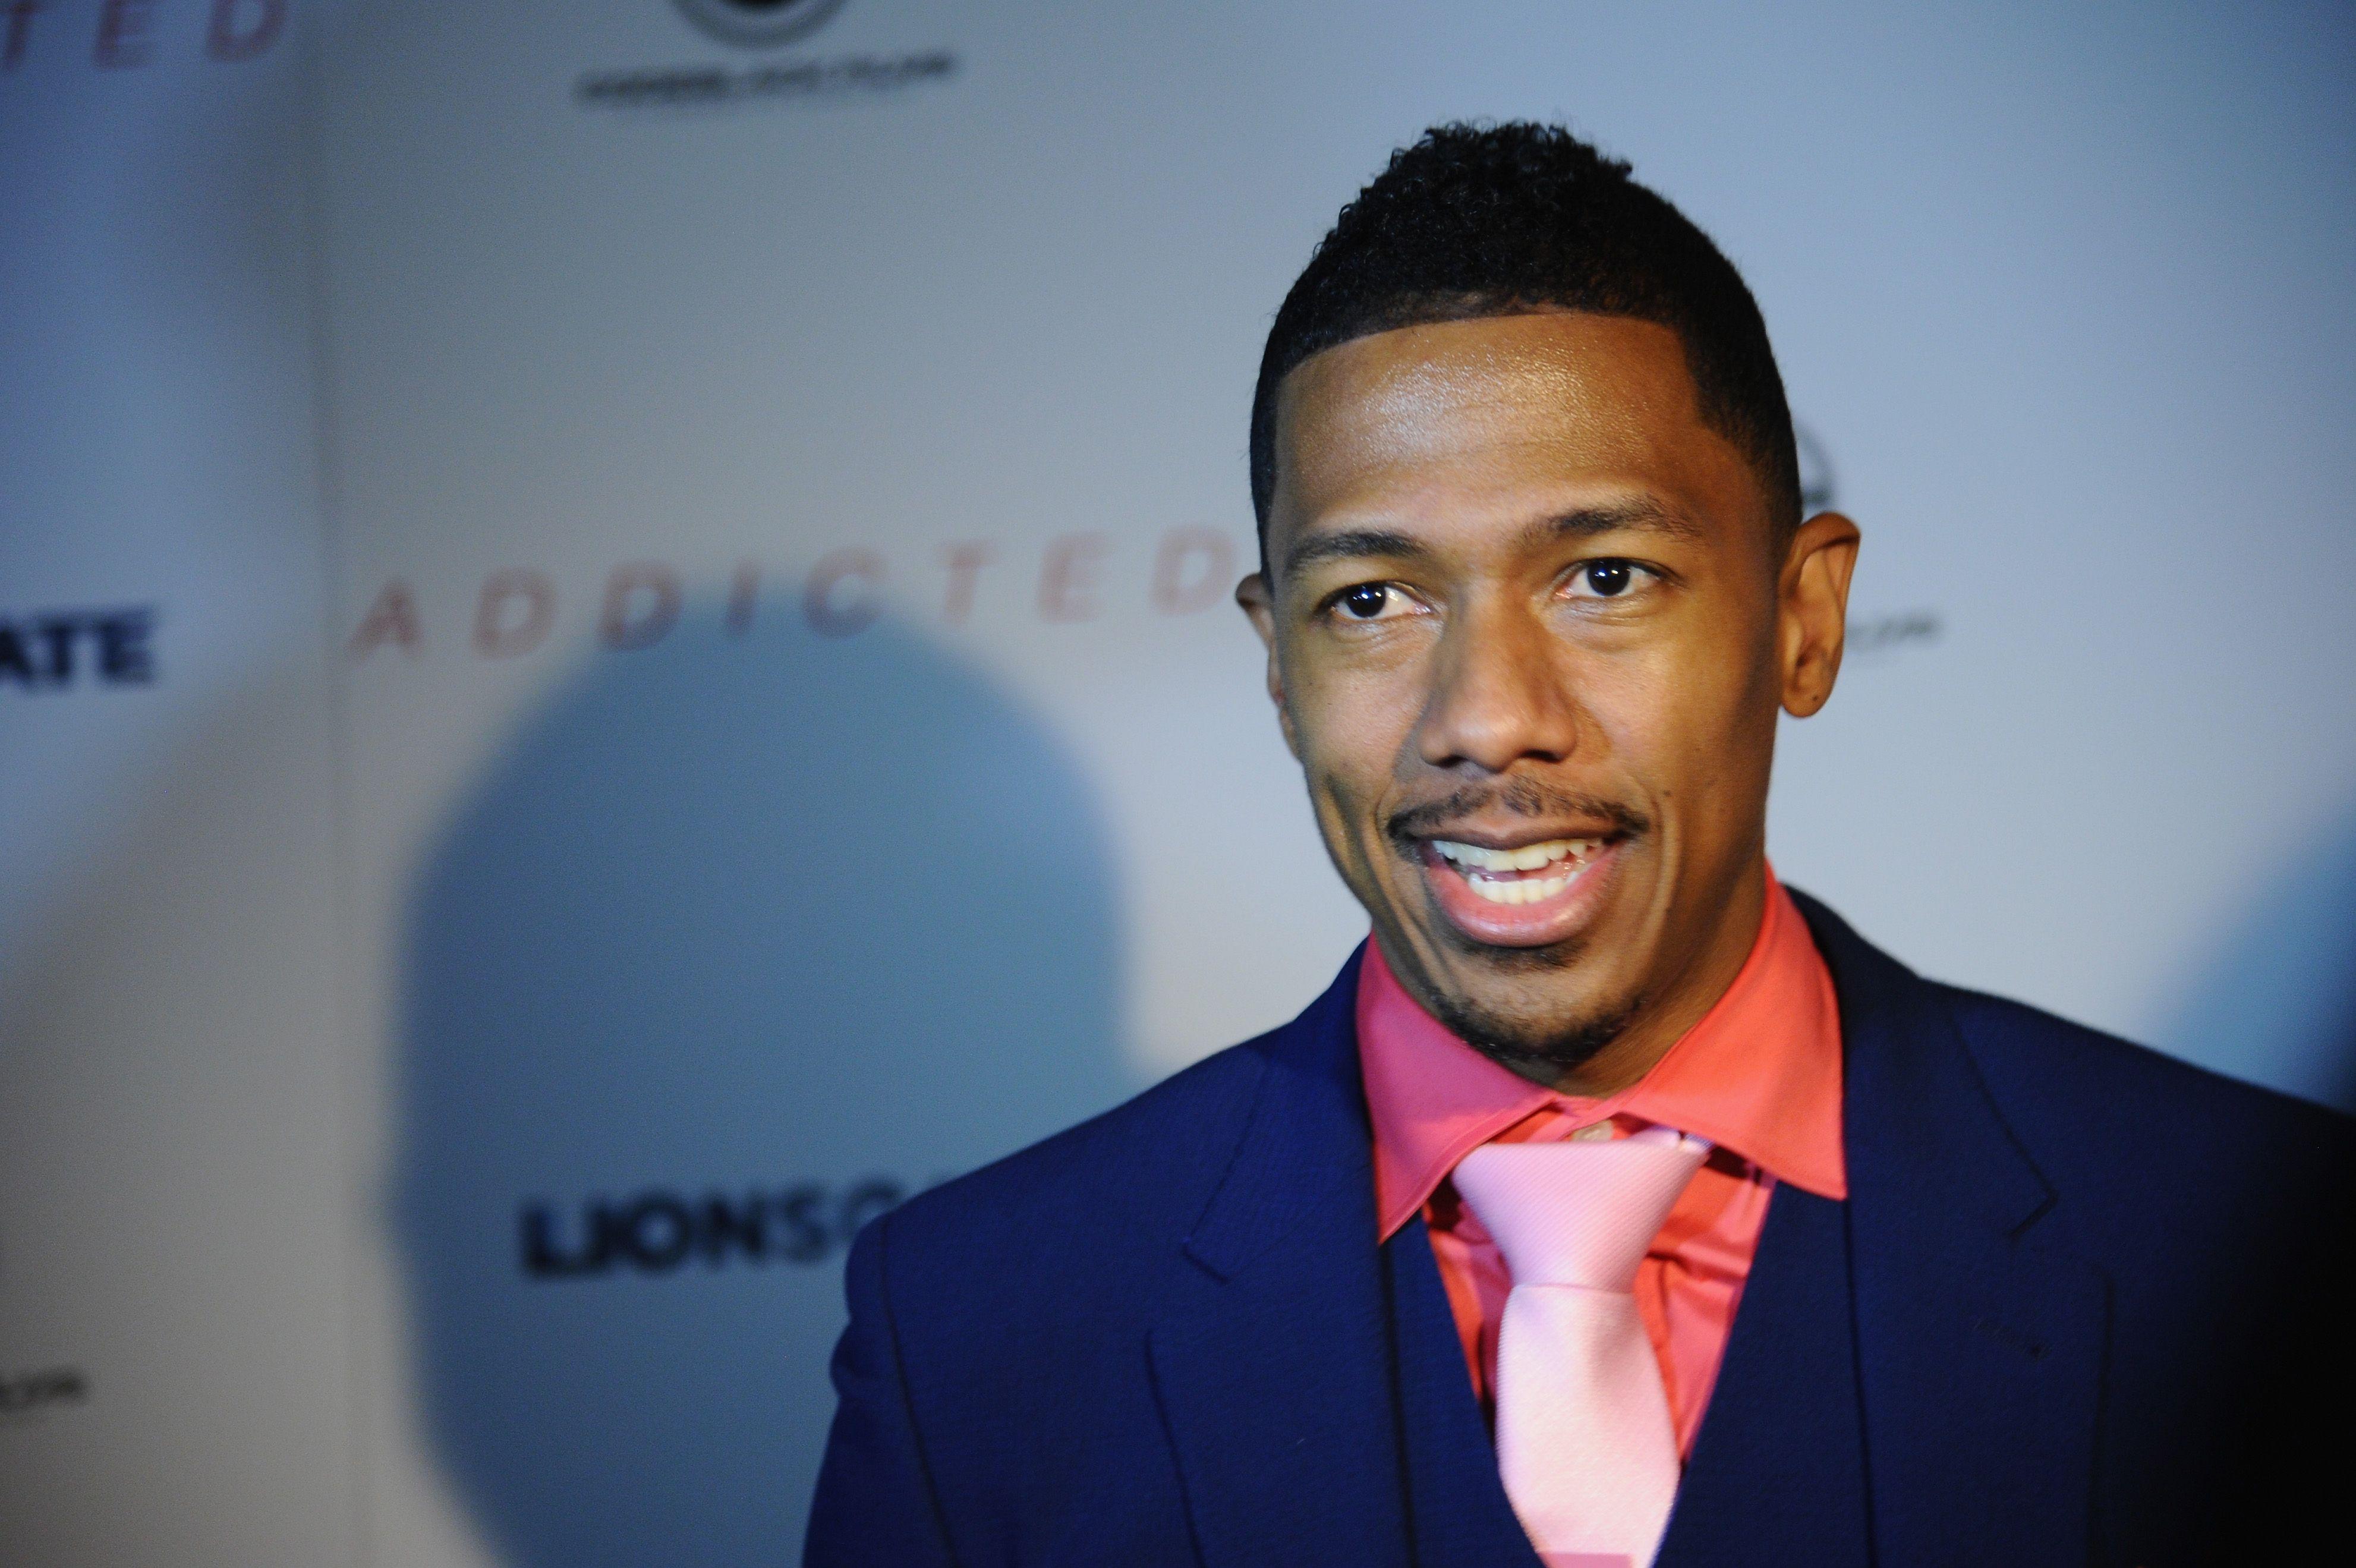 Nick Cannon Wallpapers, Pictures, Image.